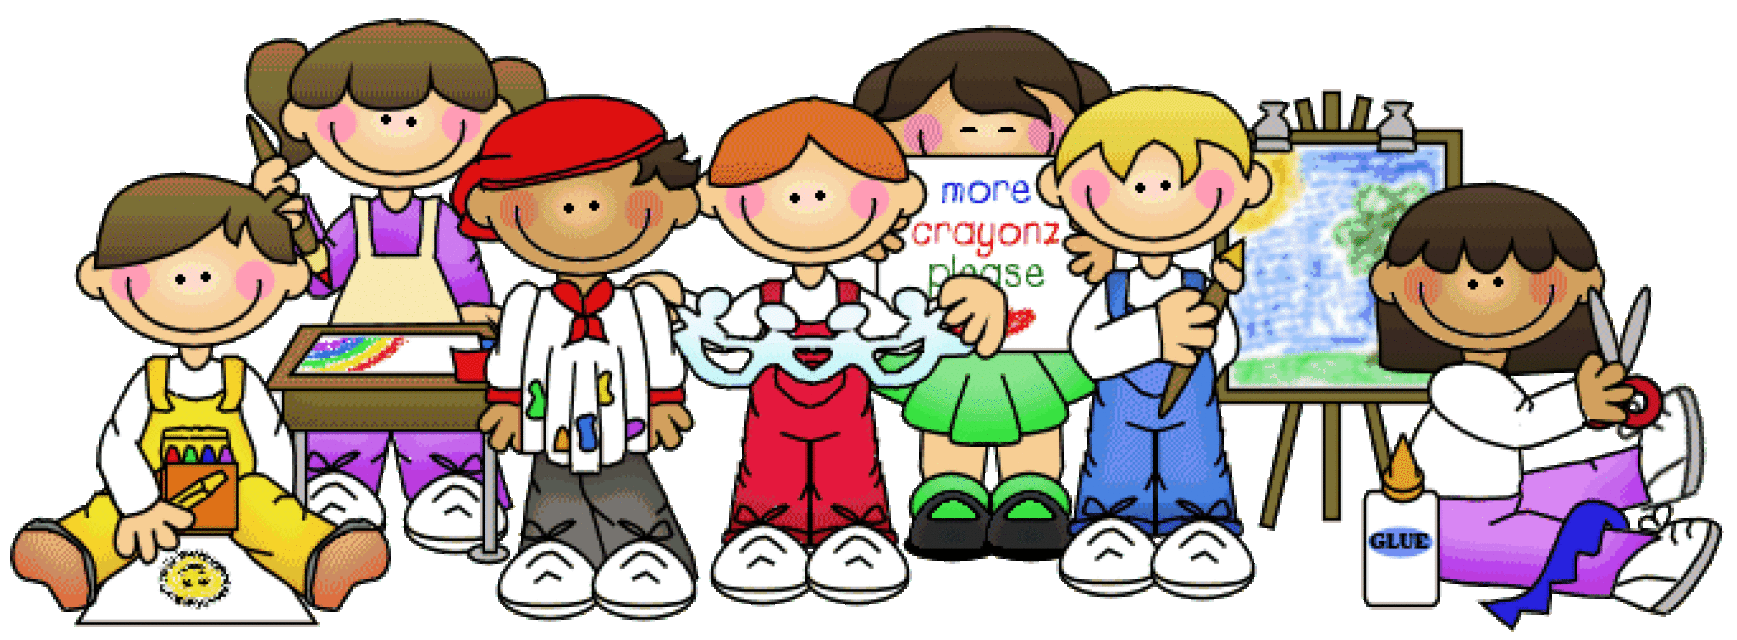 Curriculum lesson building for. Housekeeping clipart classroom